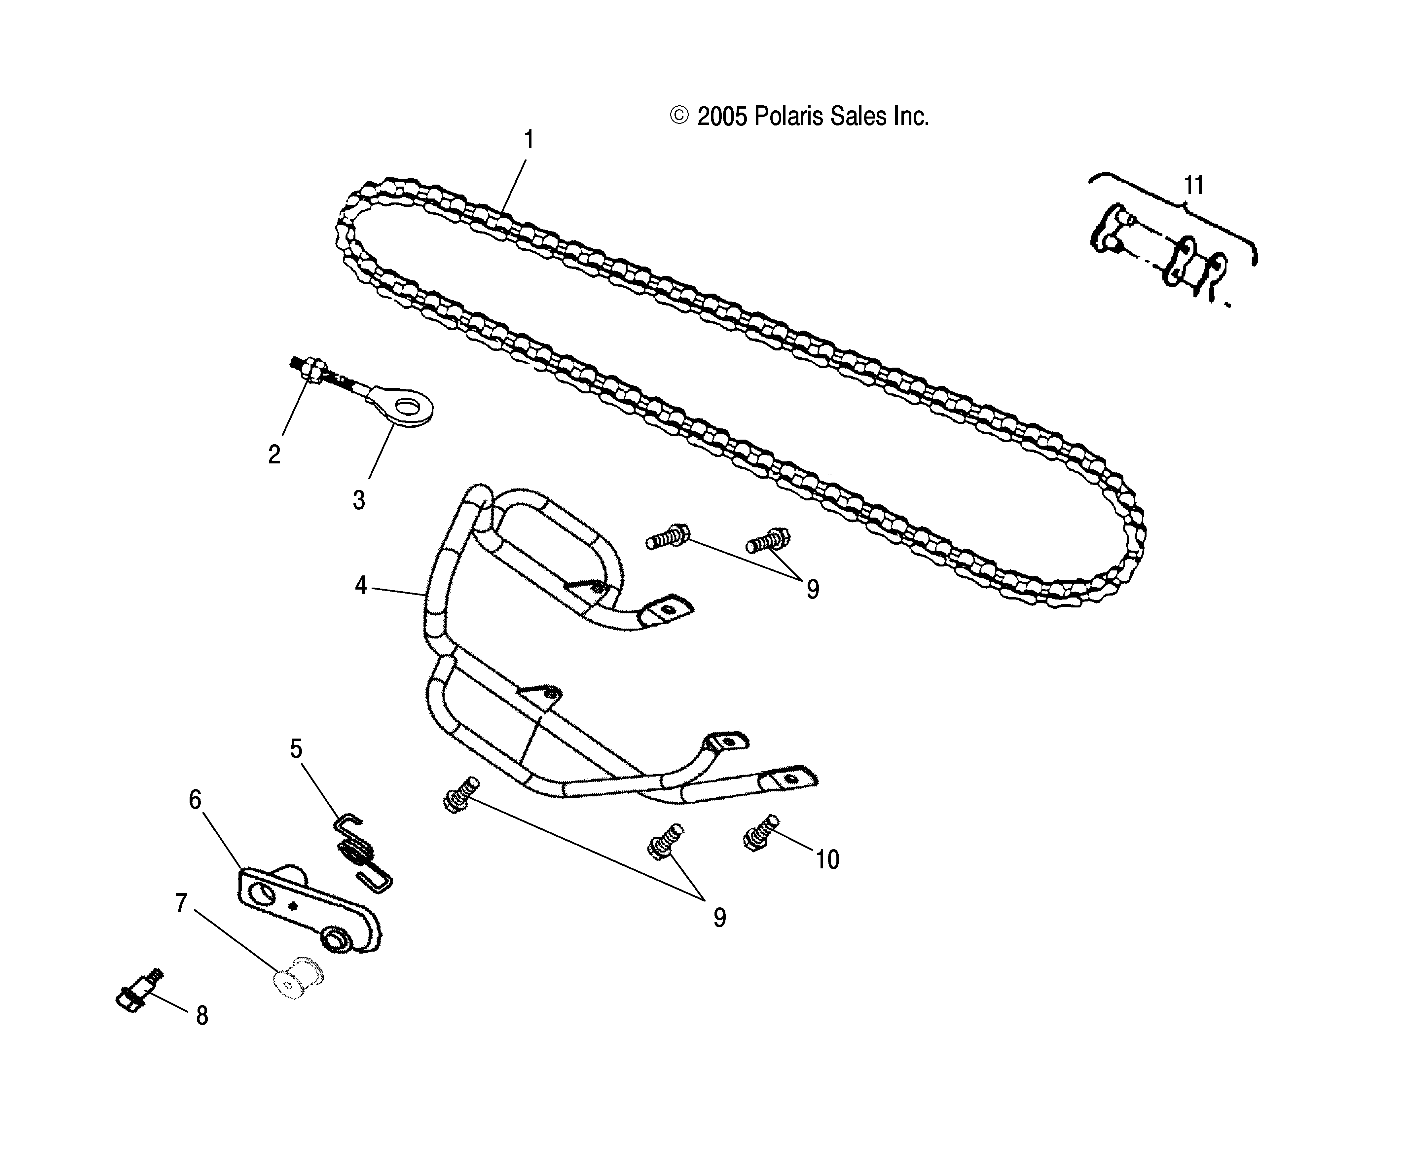 Part Number : 0453037 DRIVE CHAIN ASSEMBLY